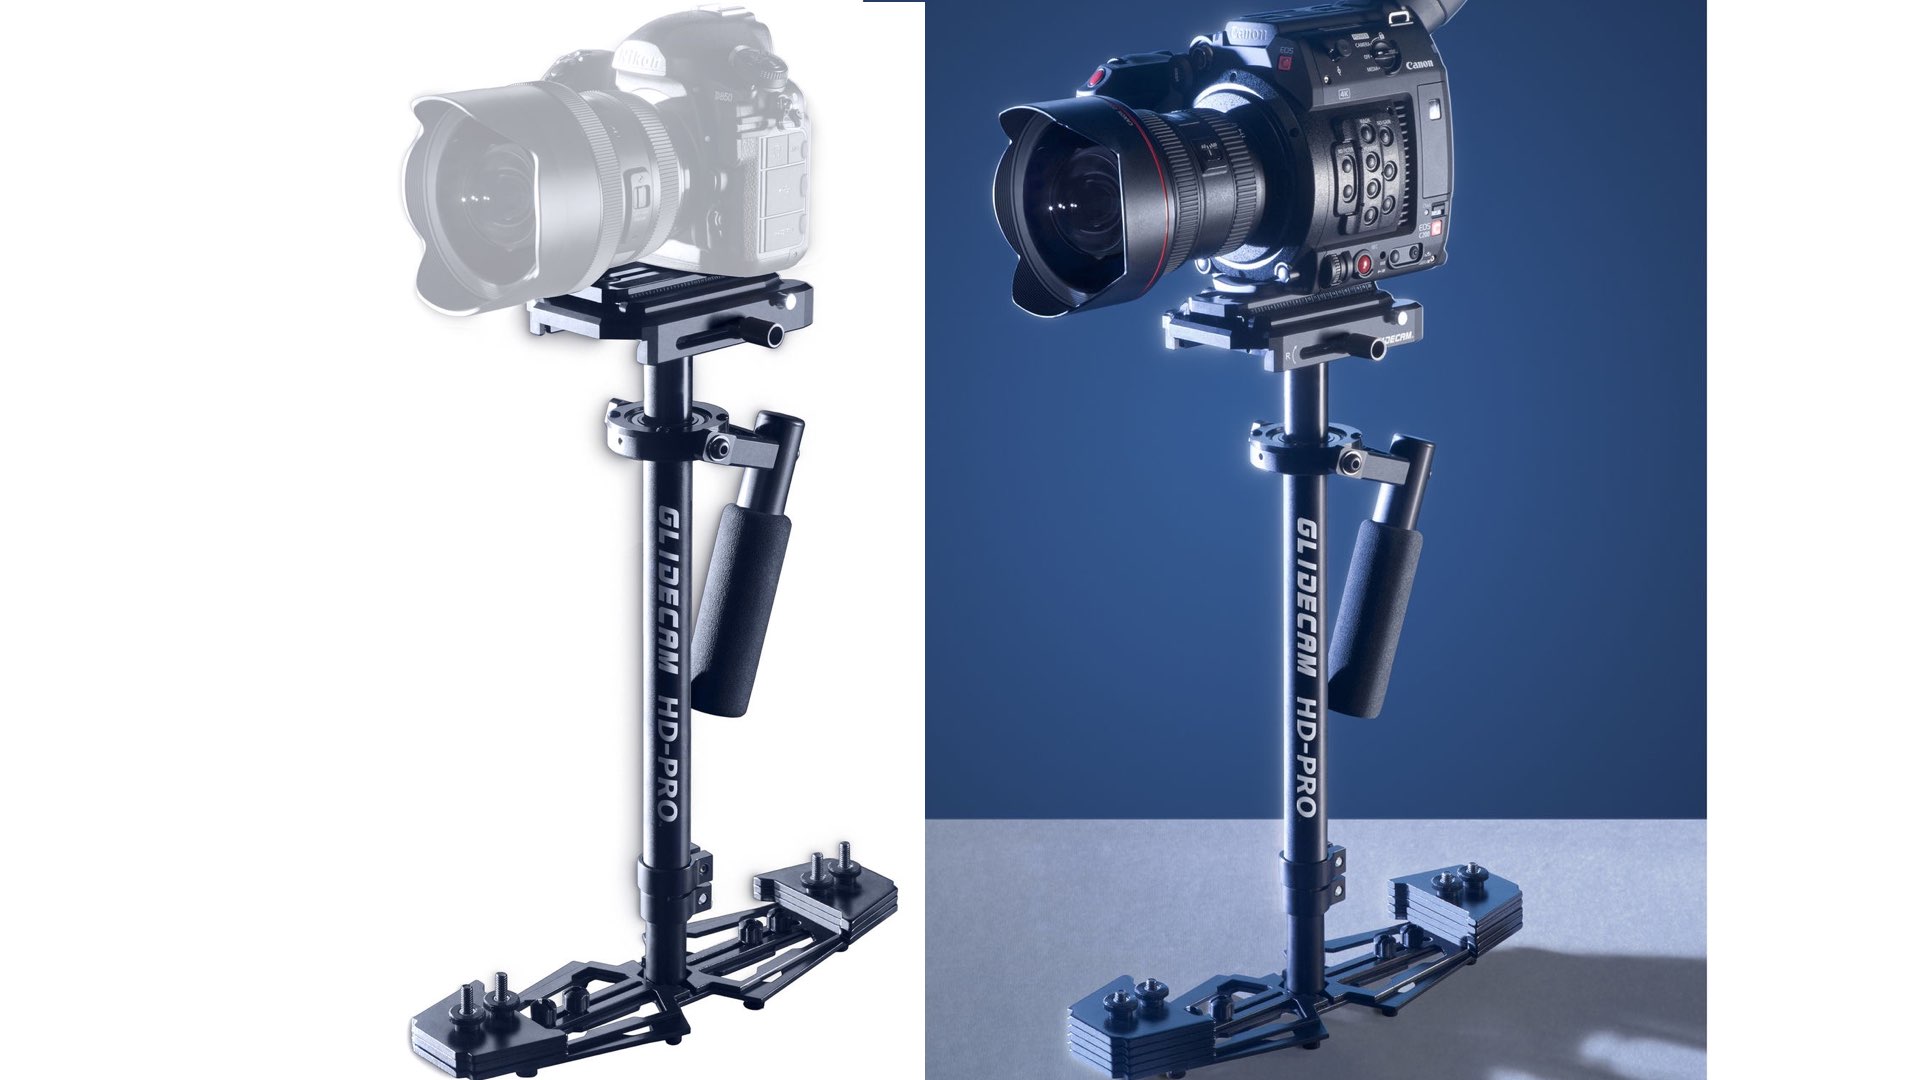 The Glidecam HD- PRO by Glidecam Industries